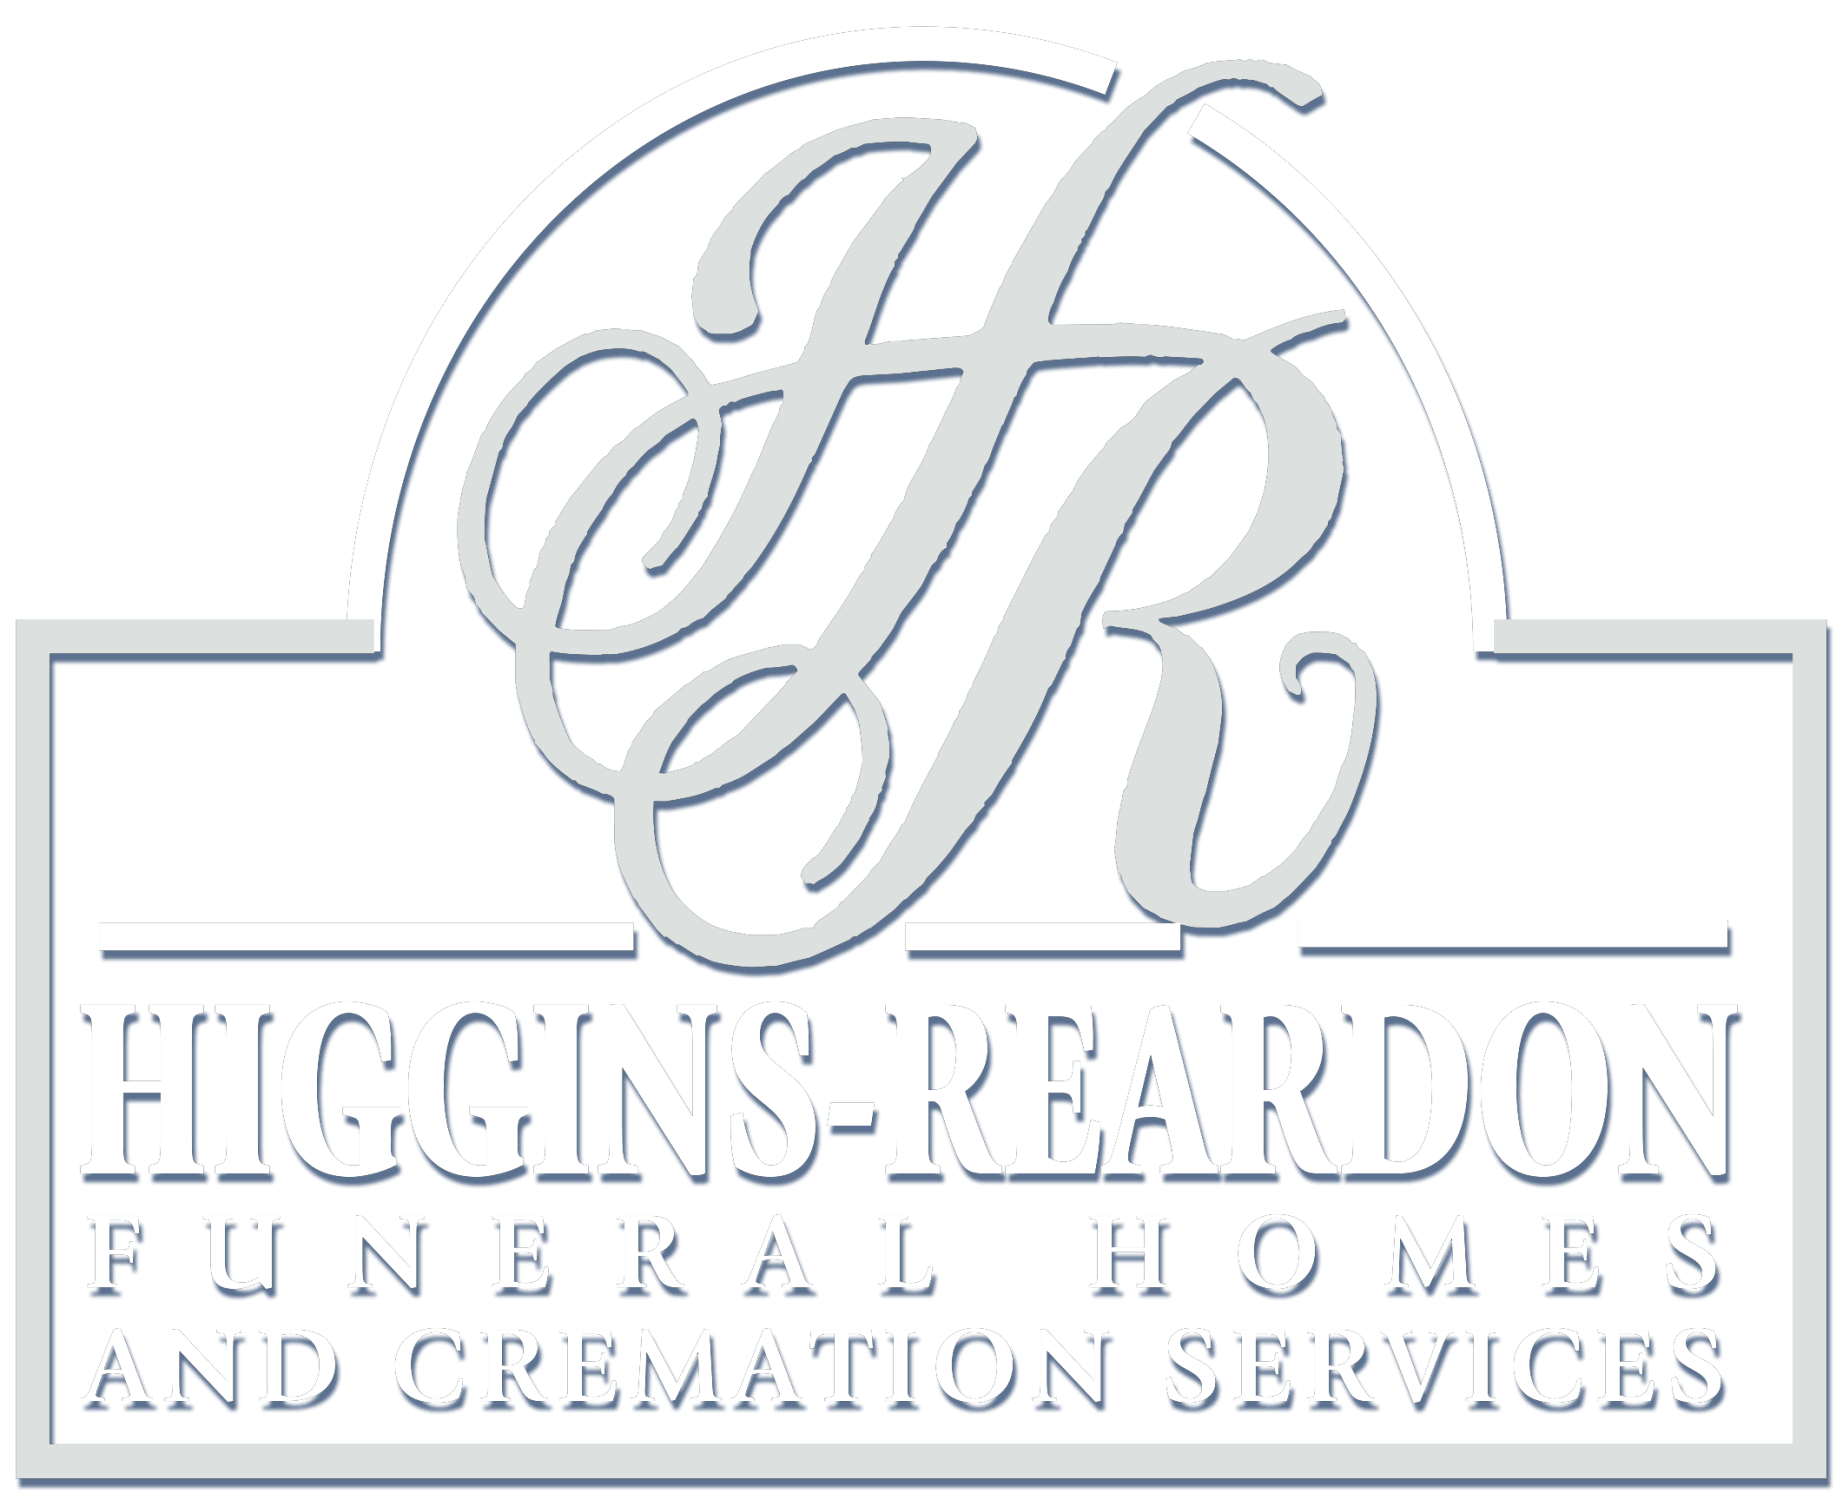 Higgins-Reardon Funeral Home and Cremation Services Logo